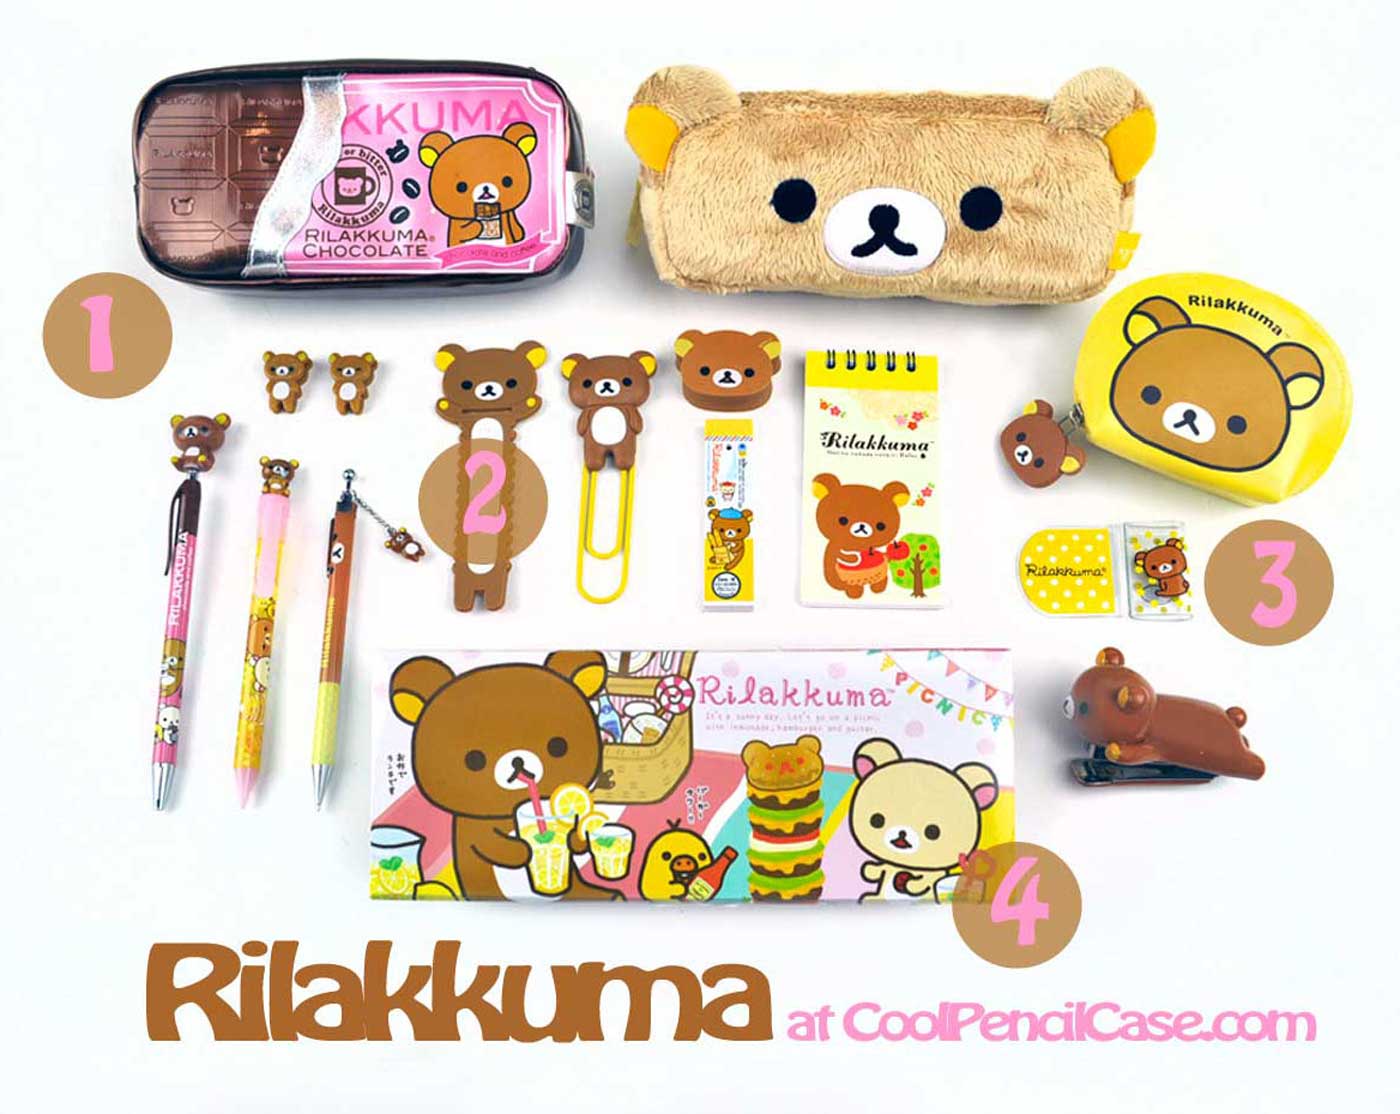 Cool Pencil Case: All Things Rilakkuma at CoolPencilCase